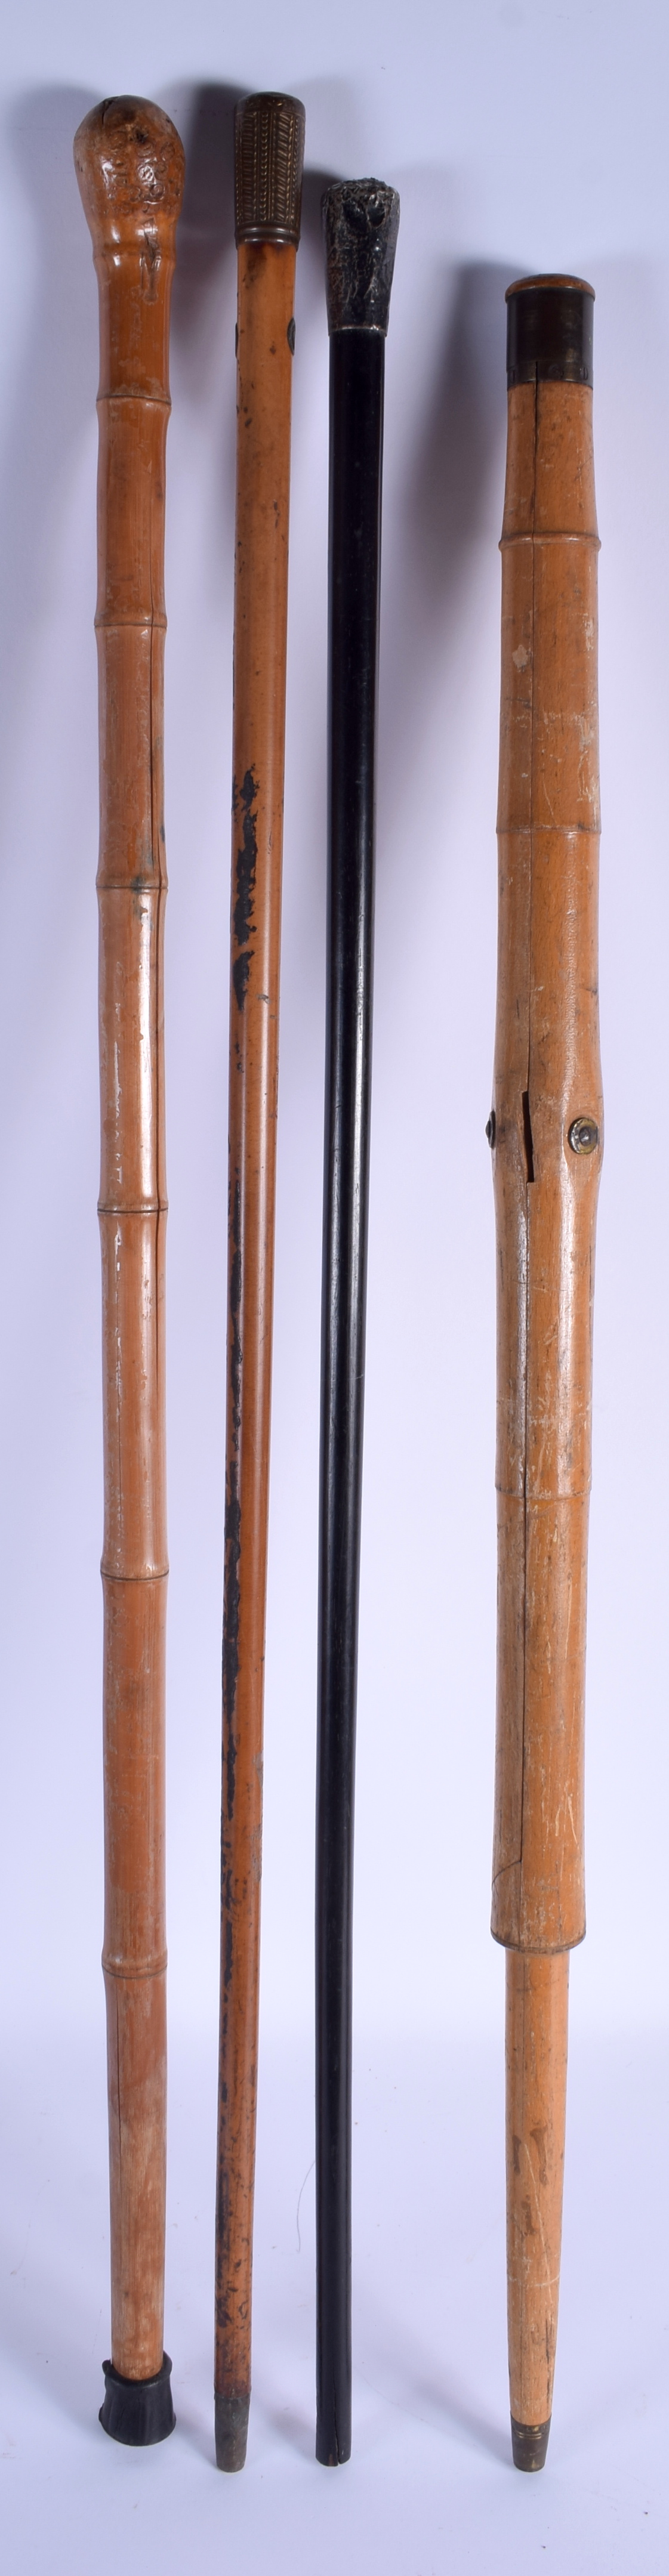 FOUR ASSORTED VINTAGE WALKING CANES including a gnurled bamboo cane. Largest 90 cm long. (4) - Image 3 of 3